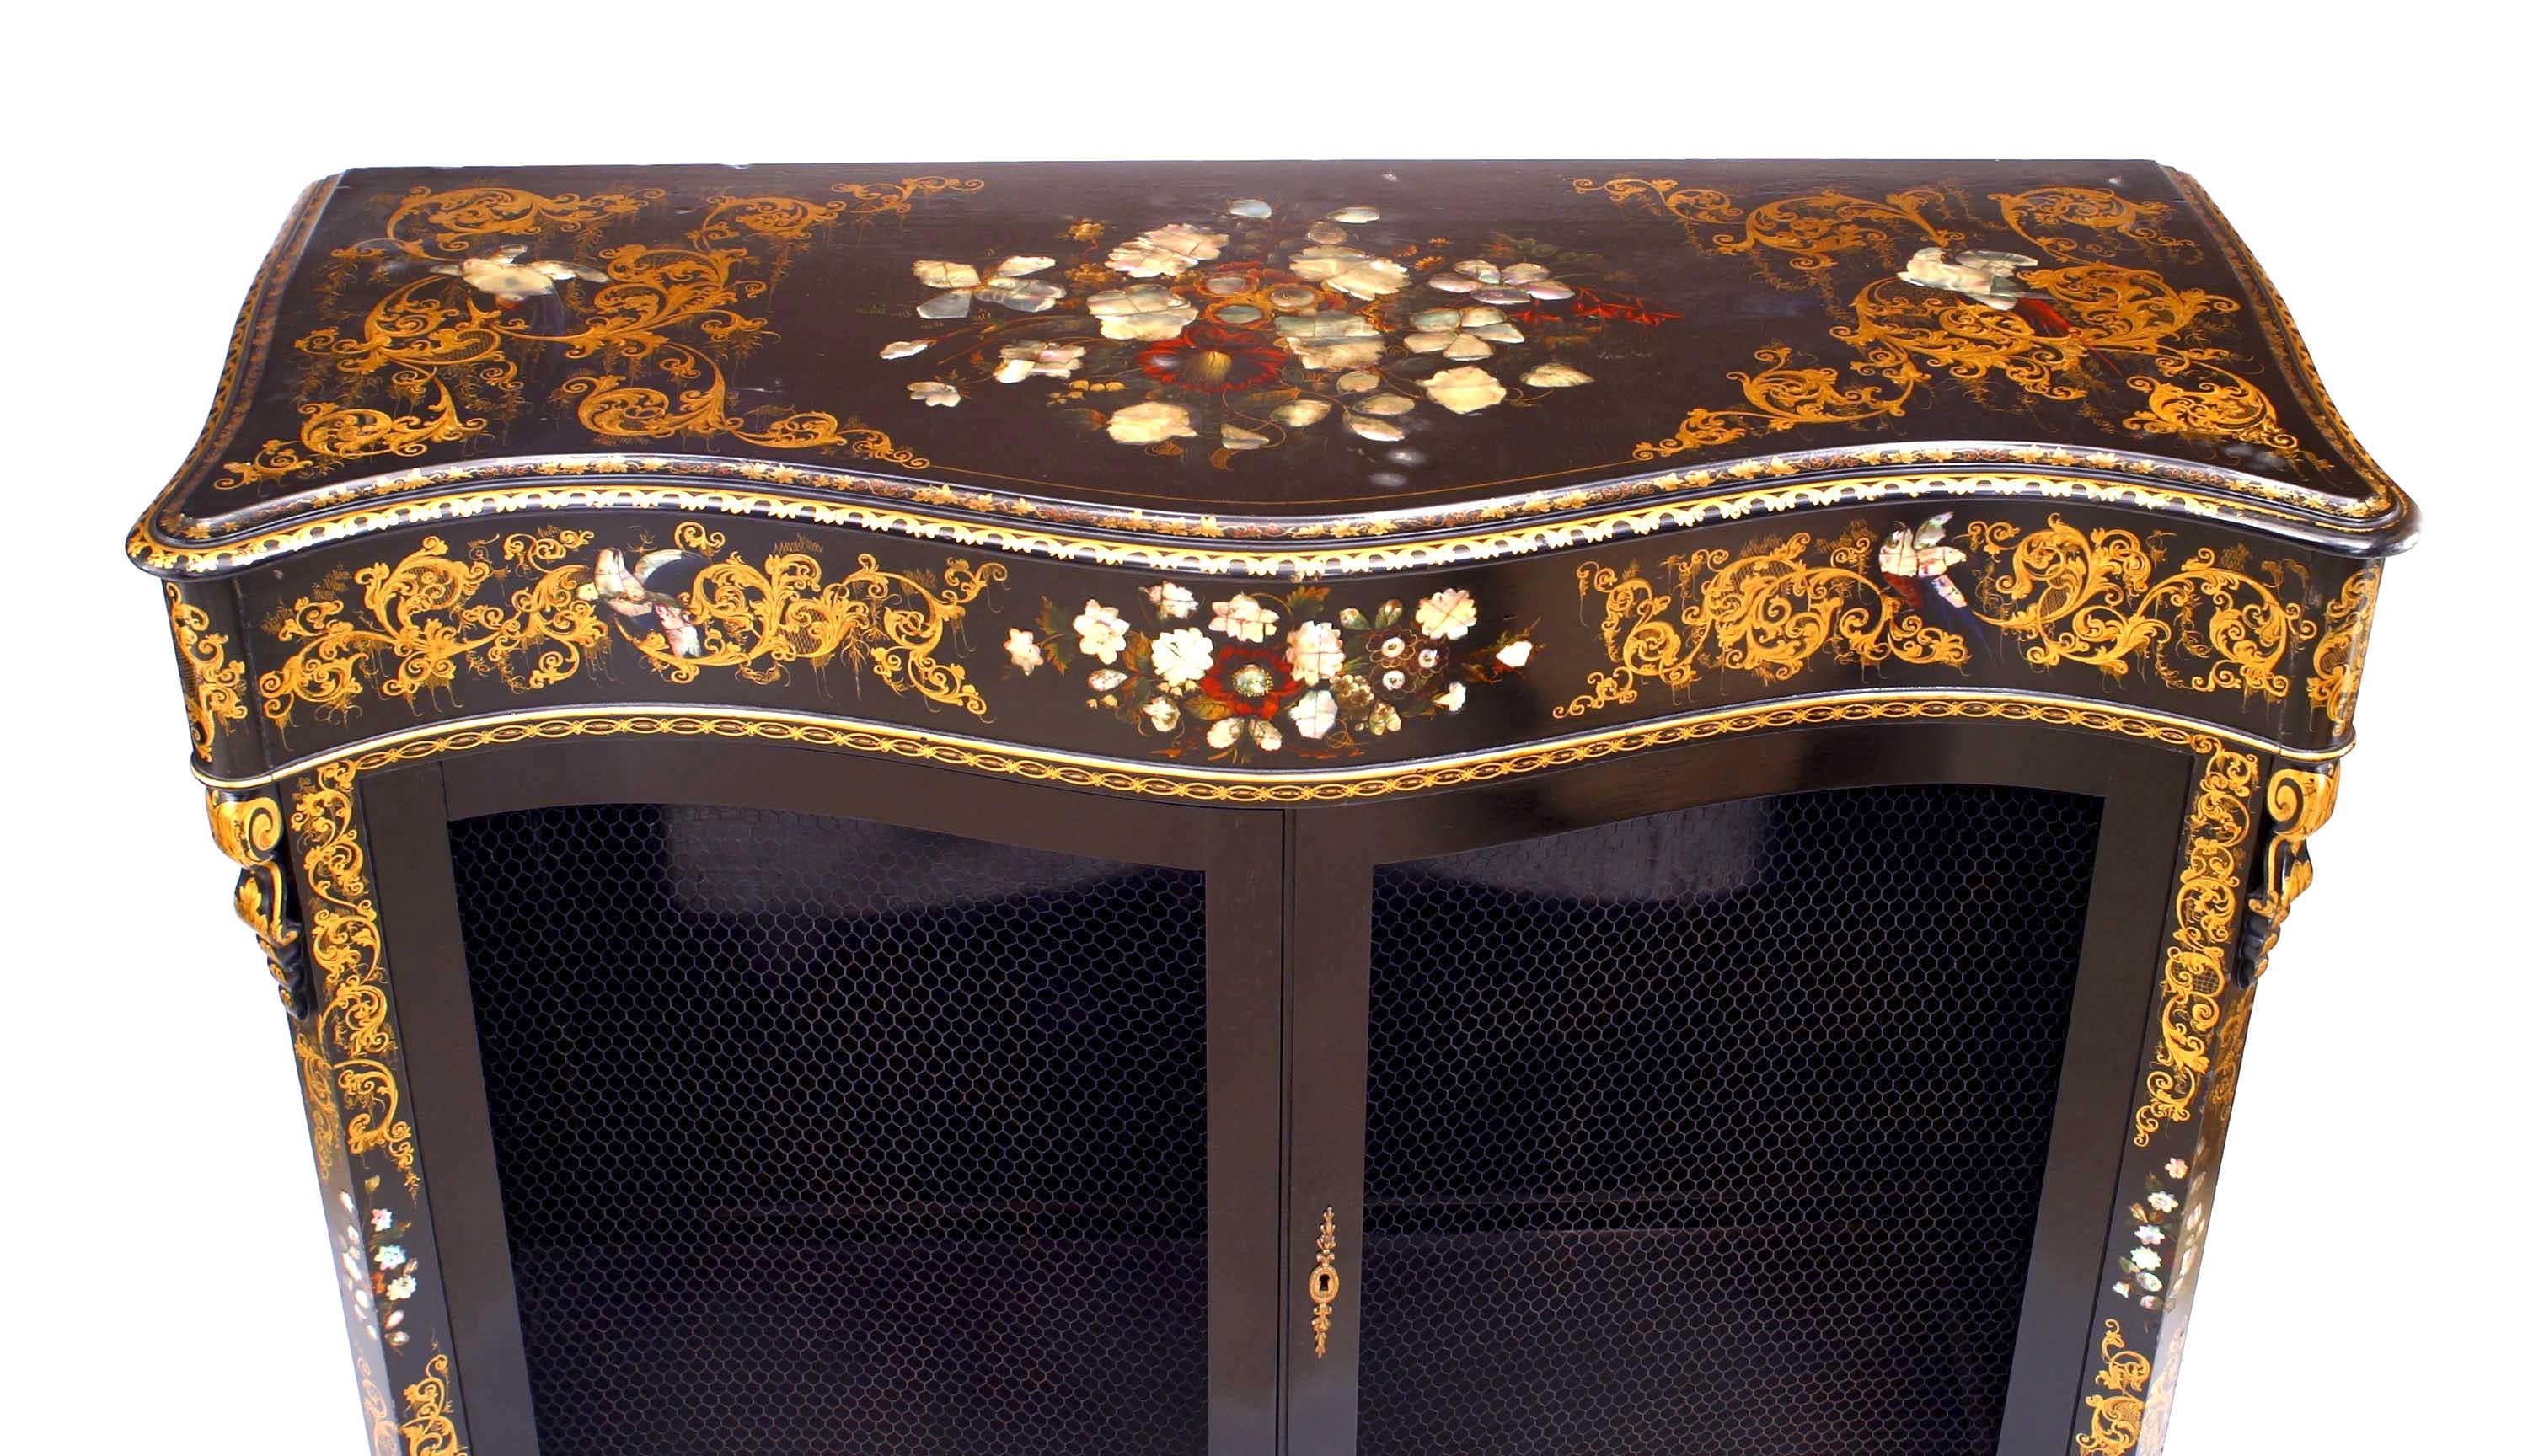 English Victorian papier mache pearl inlaid black lacquered cabinet with serpentine shape and 2 grill doors.
